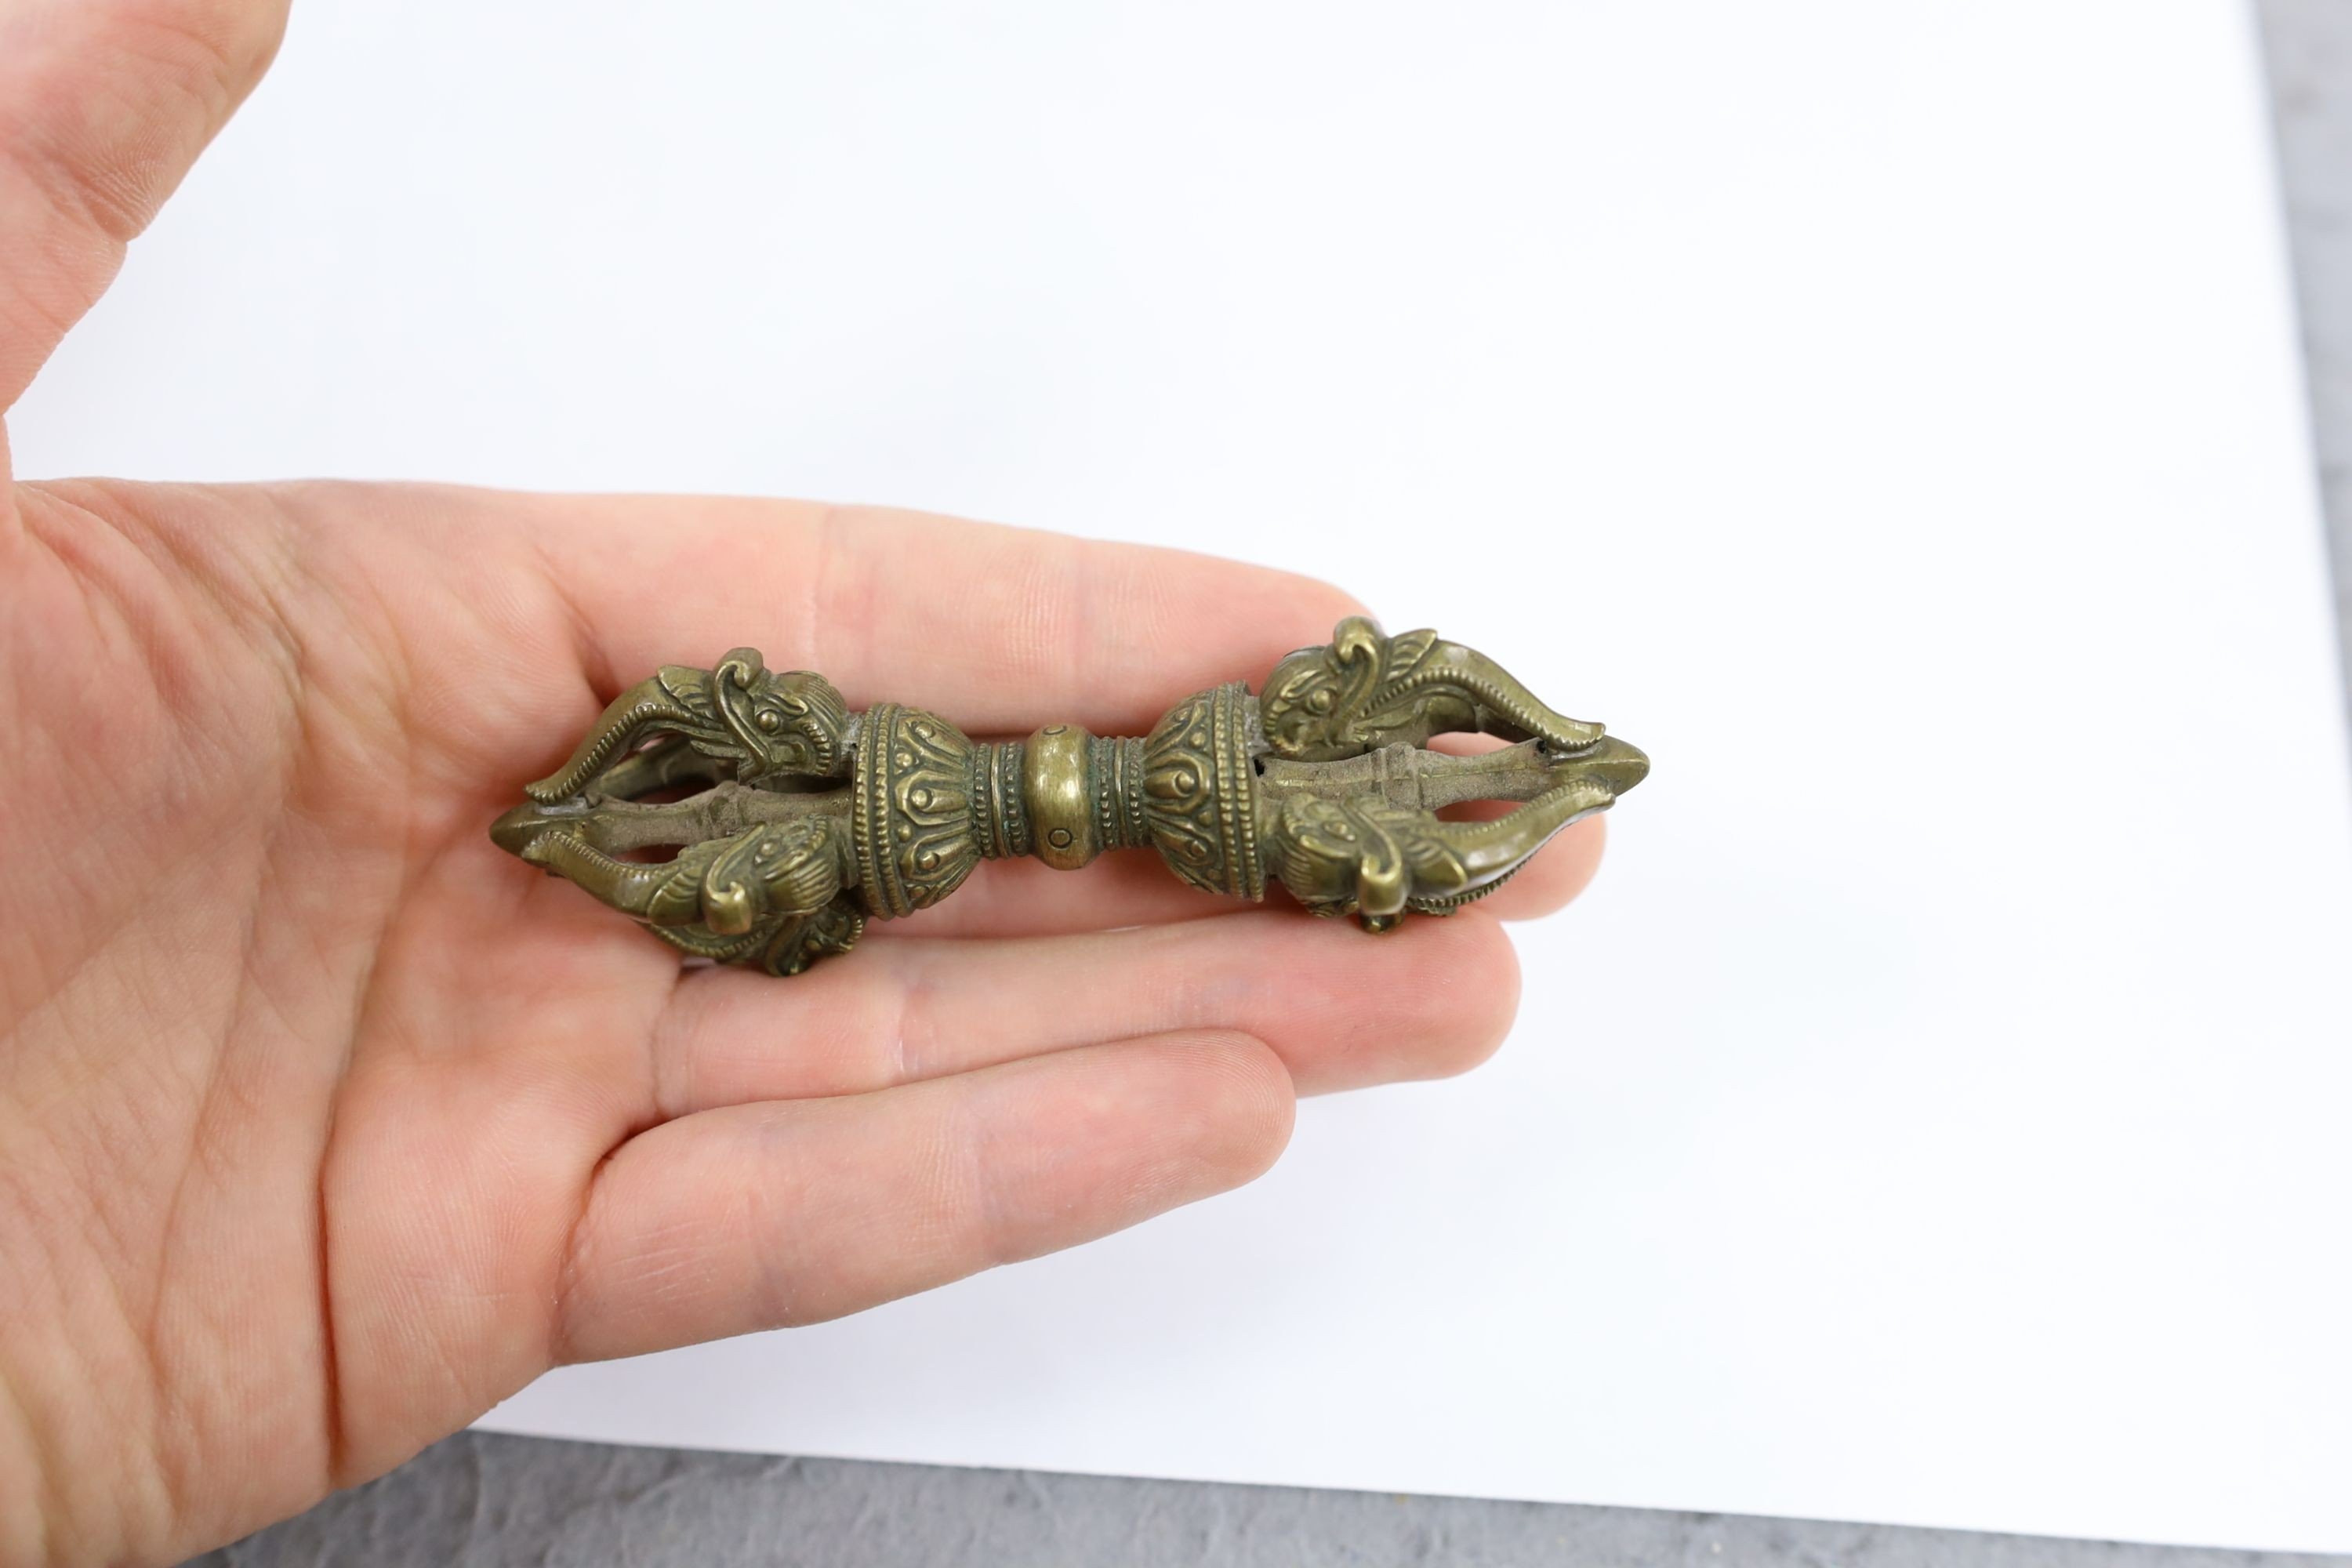 Five Chinese or Tibetan bronze figures or Buddhist implements, tallest 13cms high